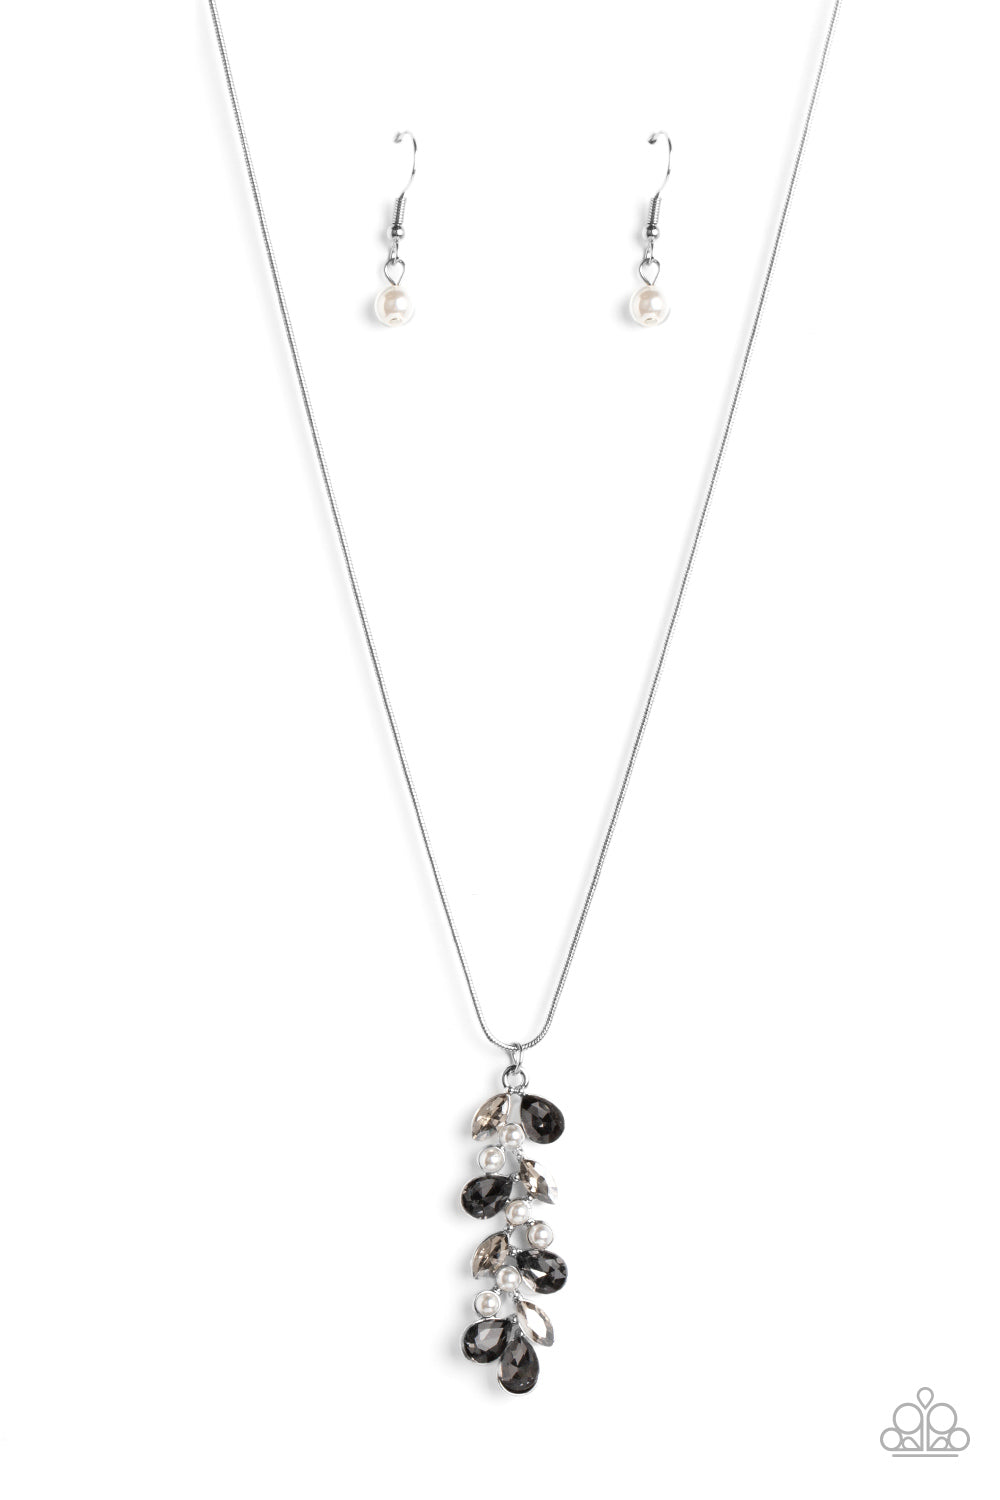 Paparazzi Necklaces - Pearls Before VINE - Silver